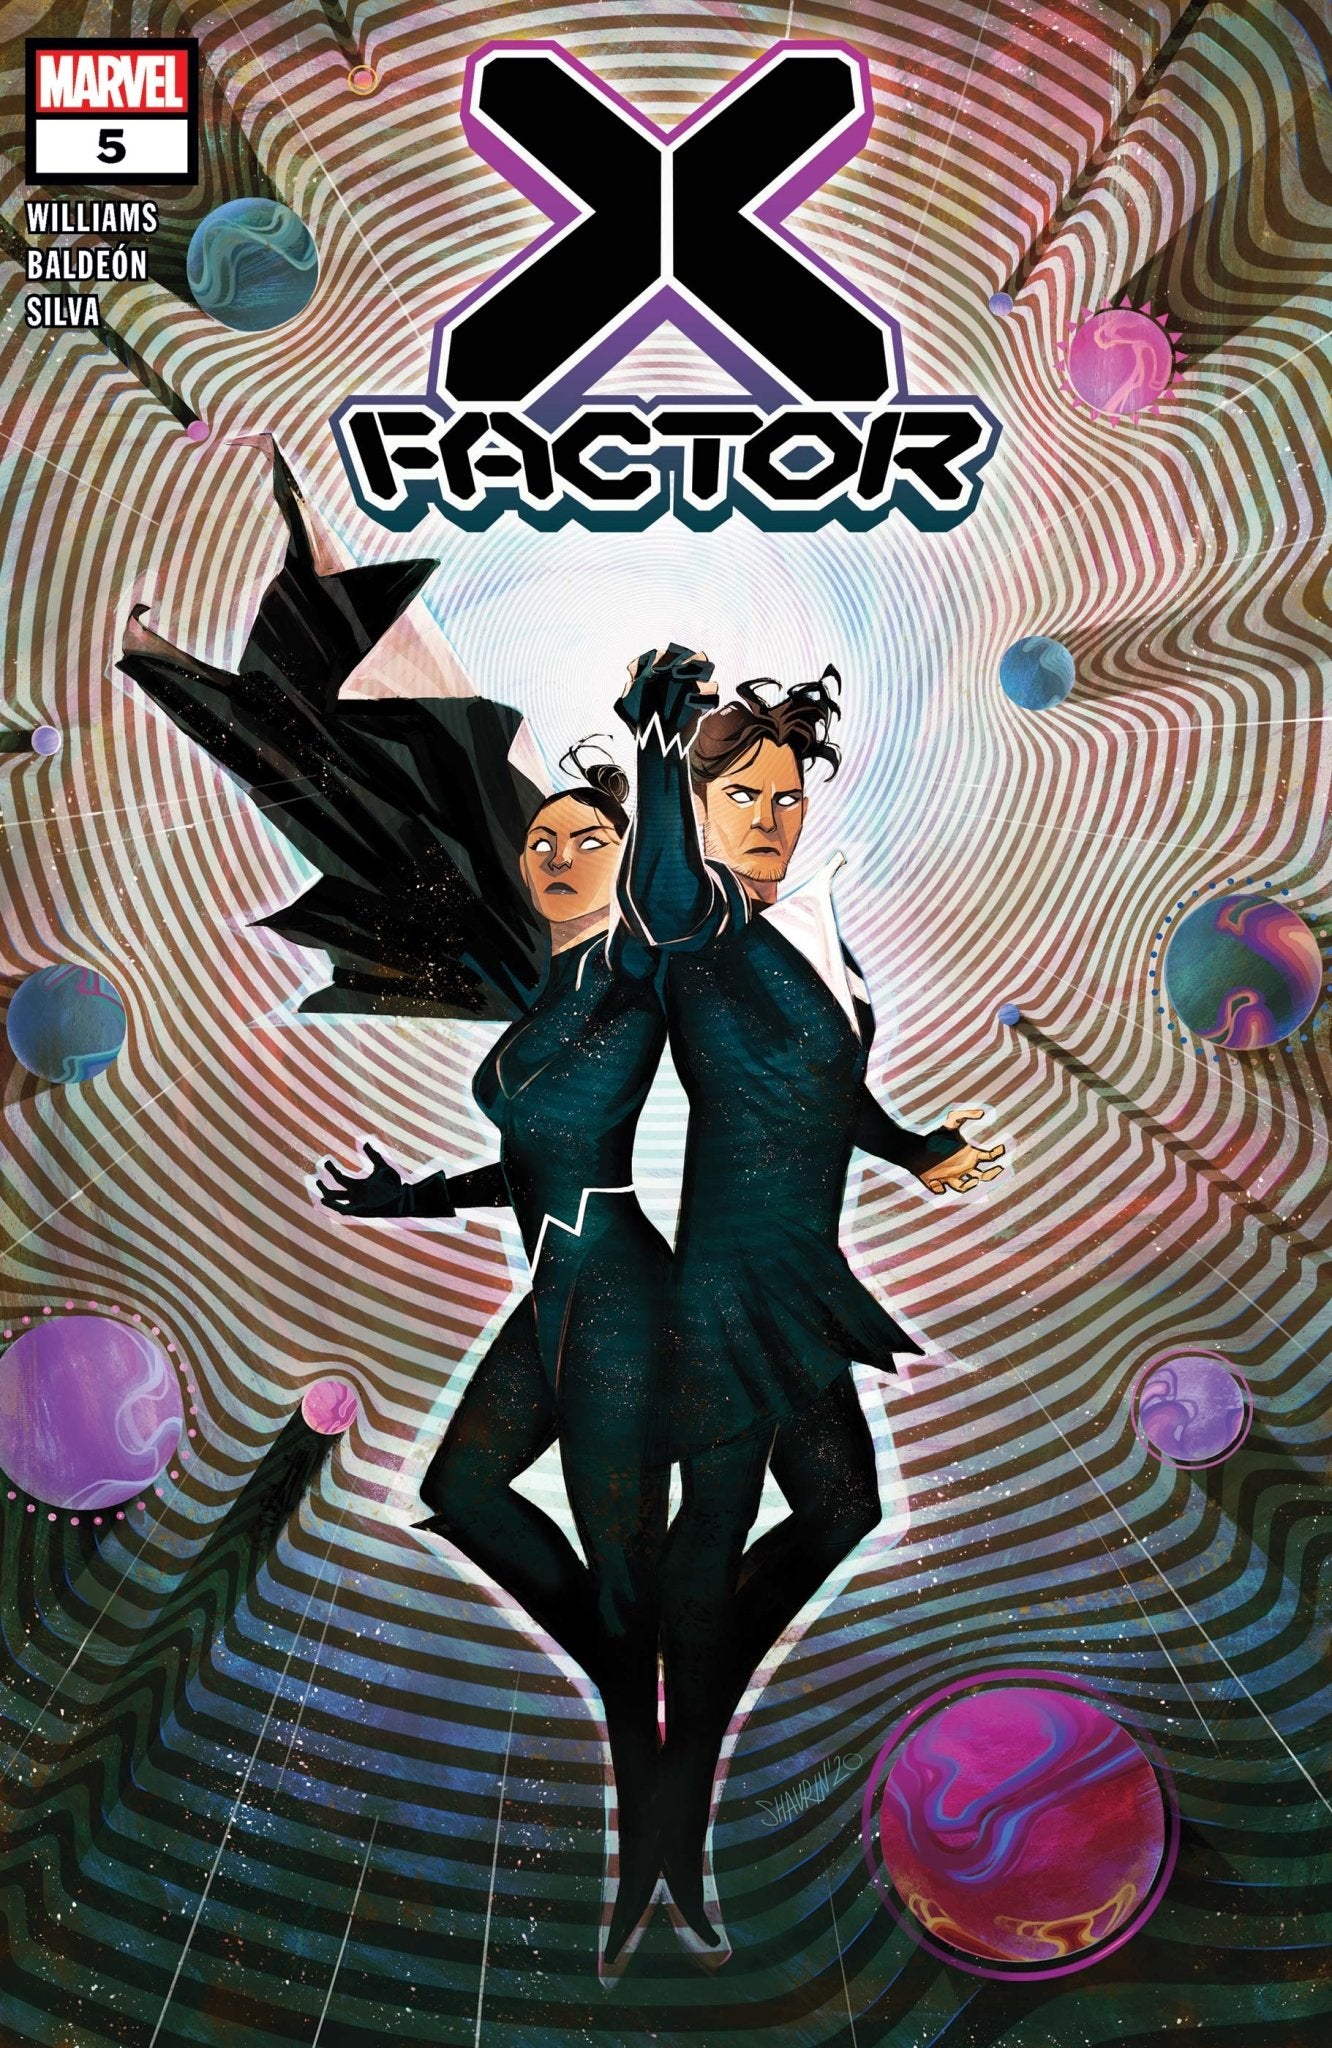 X-FACTOR #5 - The Comic Construct